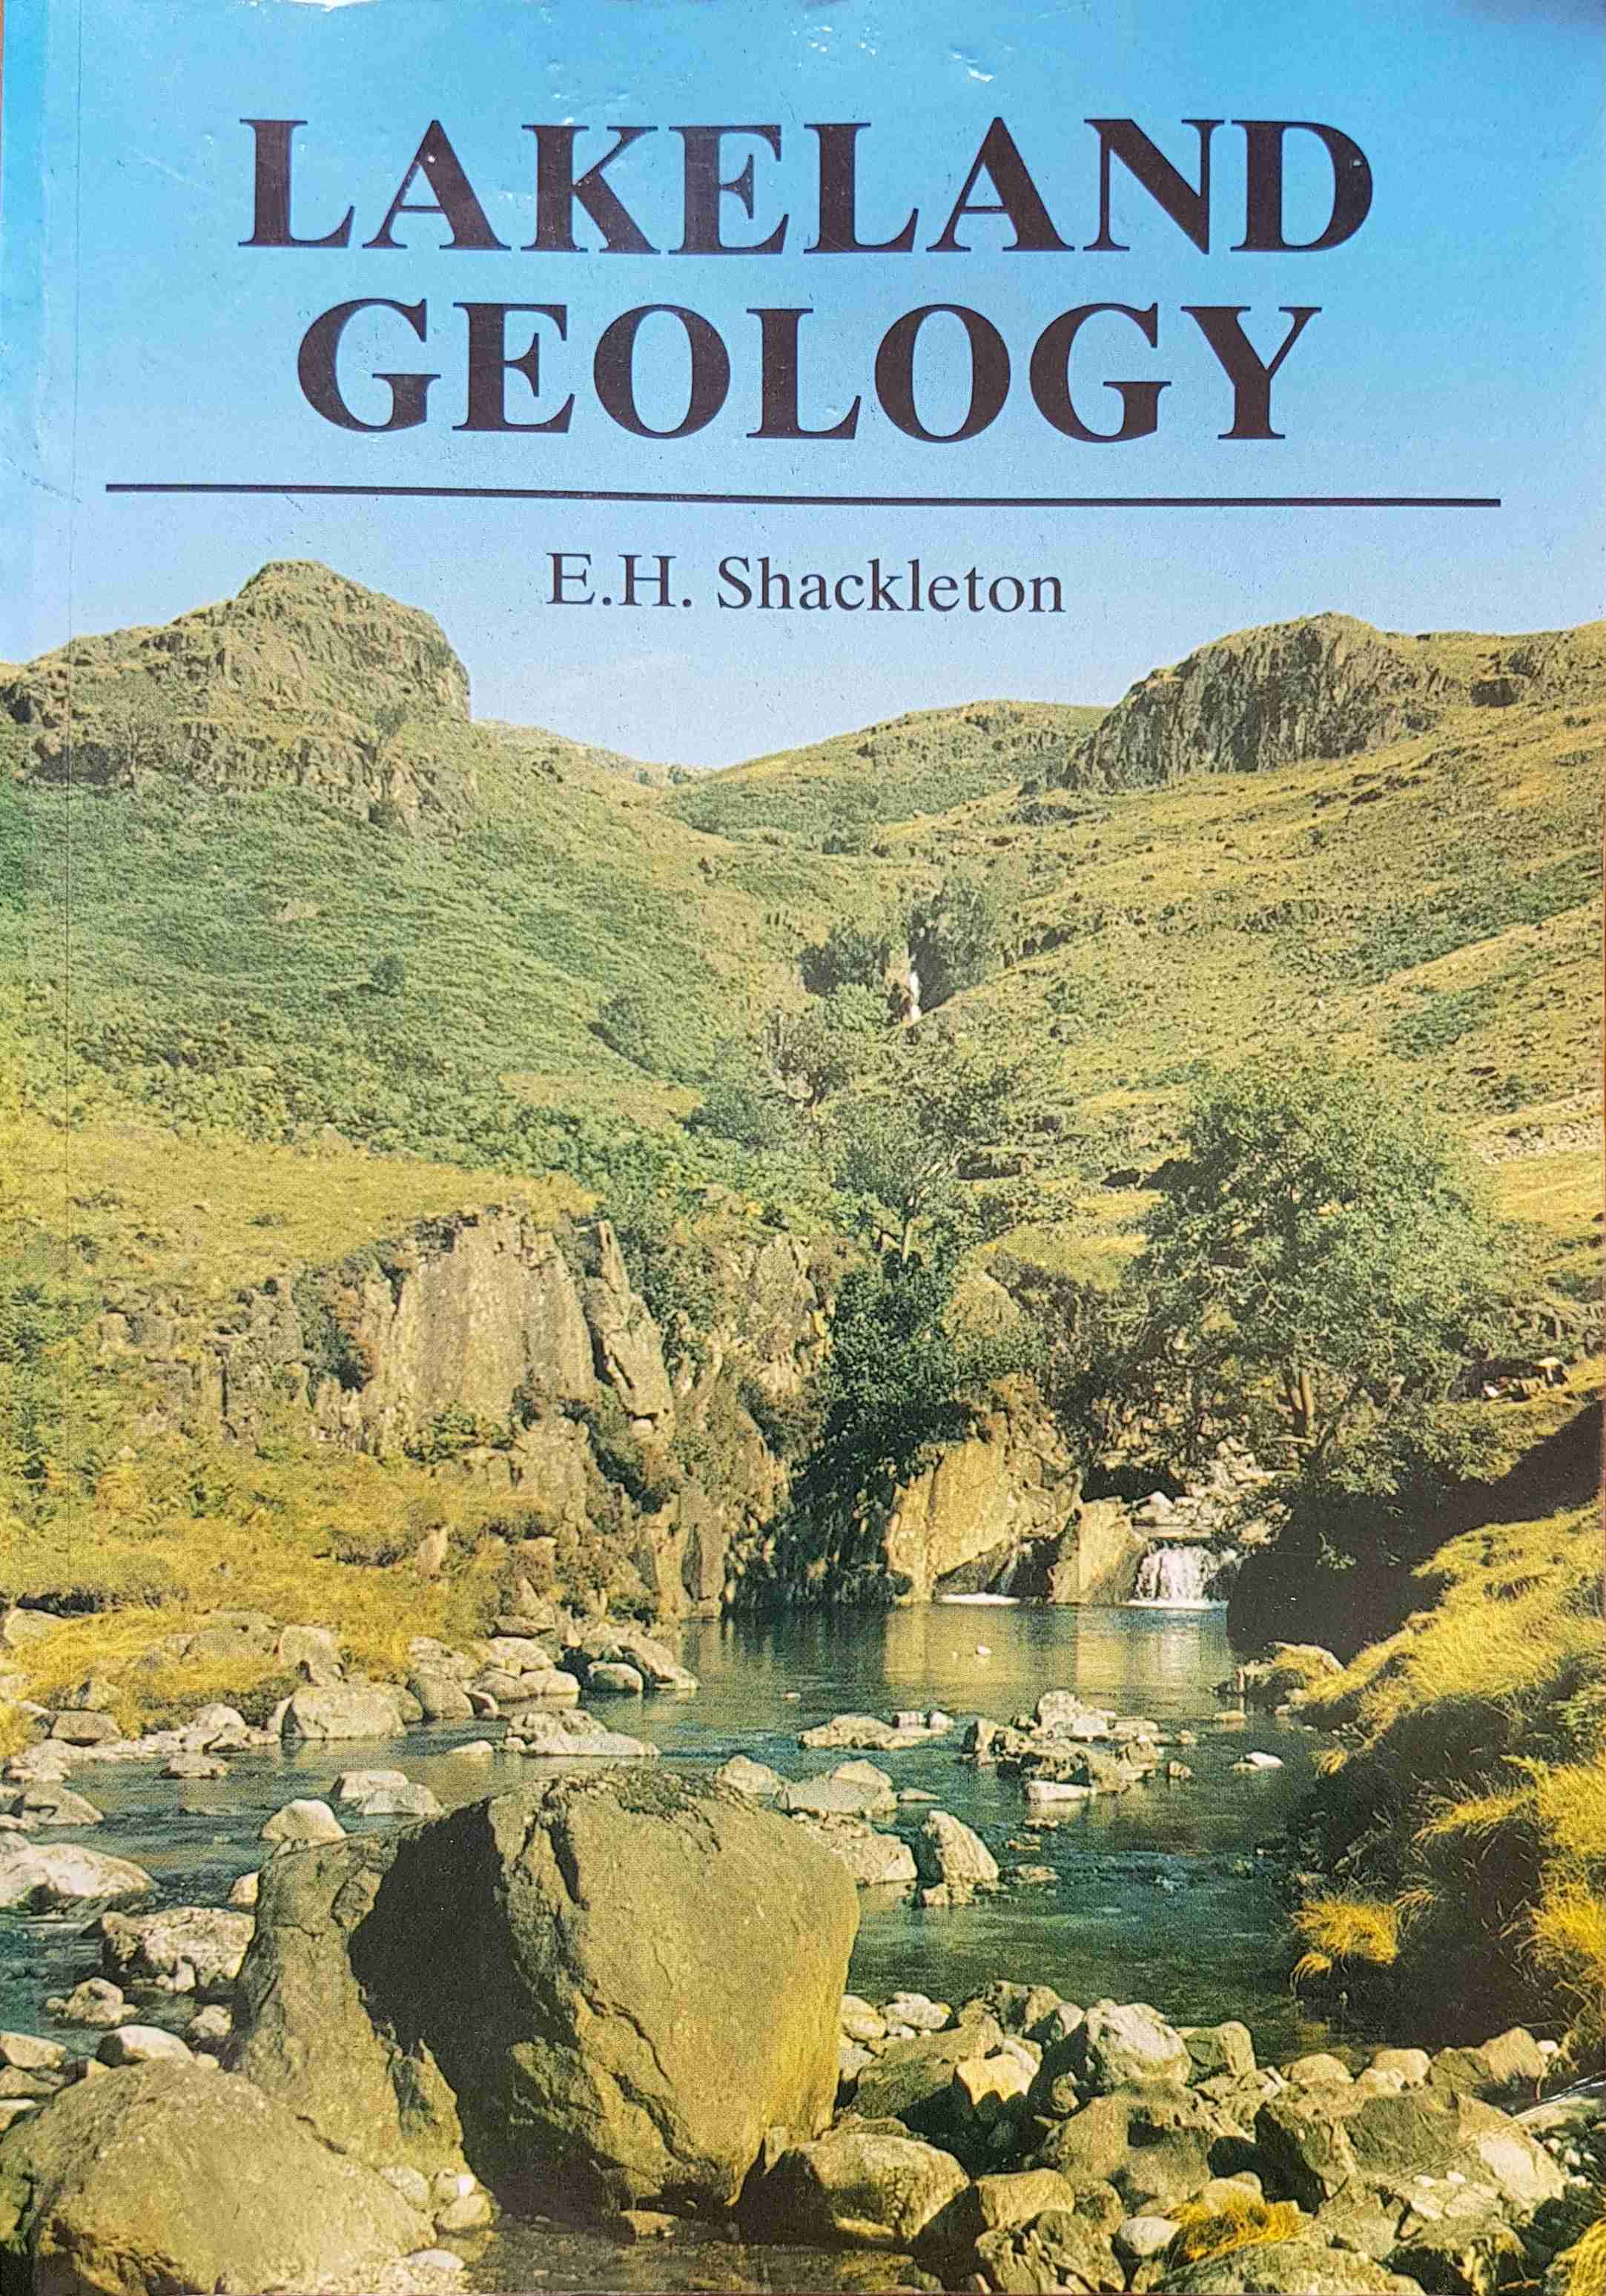 Picture of Lakeland geology by artist E. H. Shackleton 